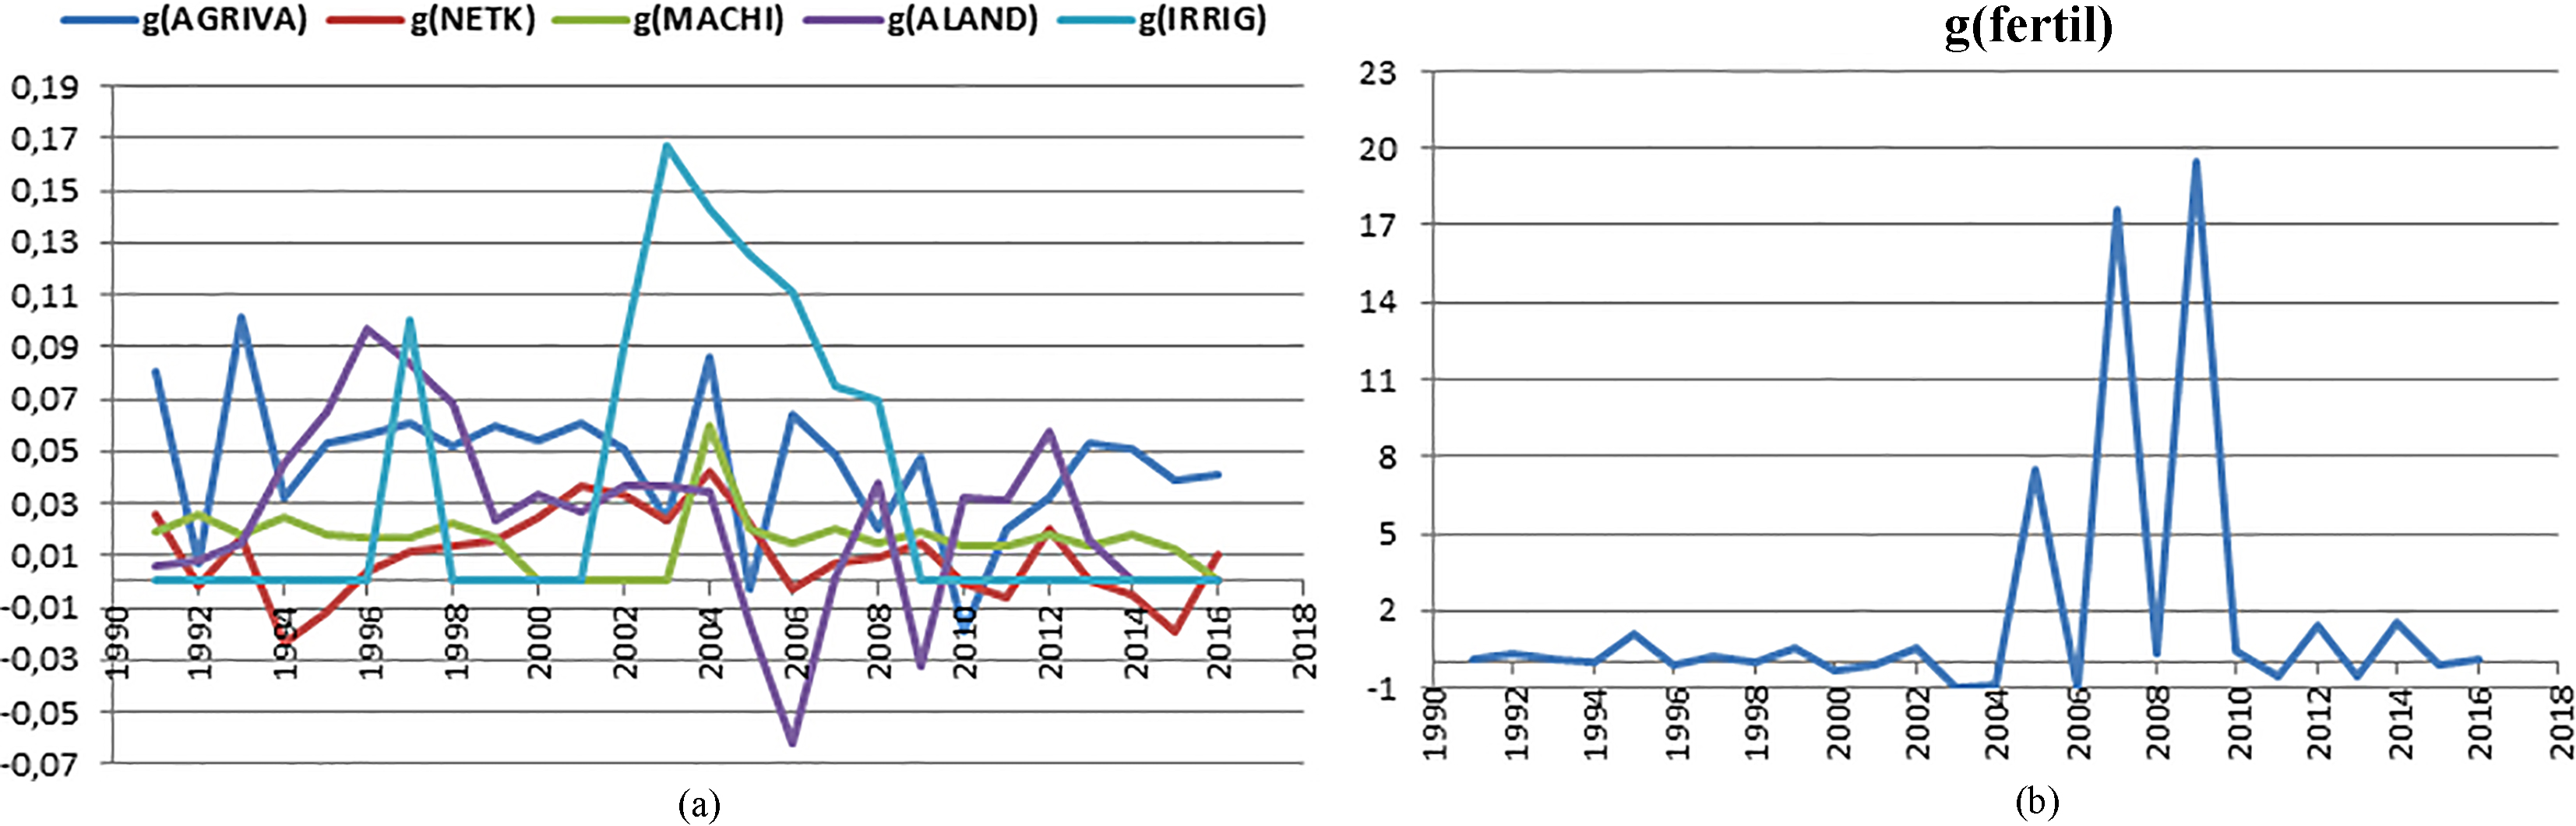 a. Growth rate of AGRIVA; NETK; MACHI; ALAND; and IRRIG, b. Growth rate of FERTIL.